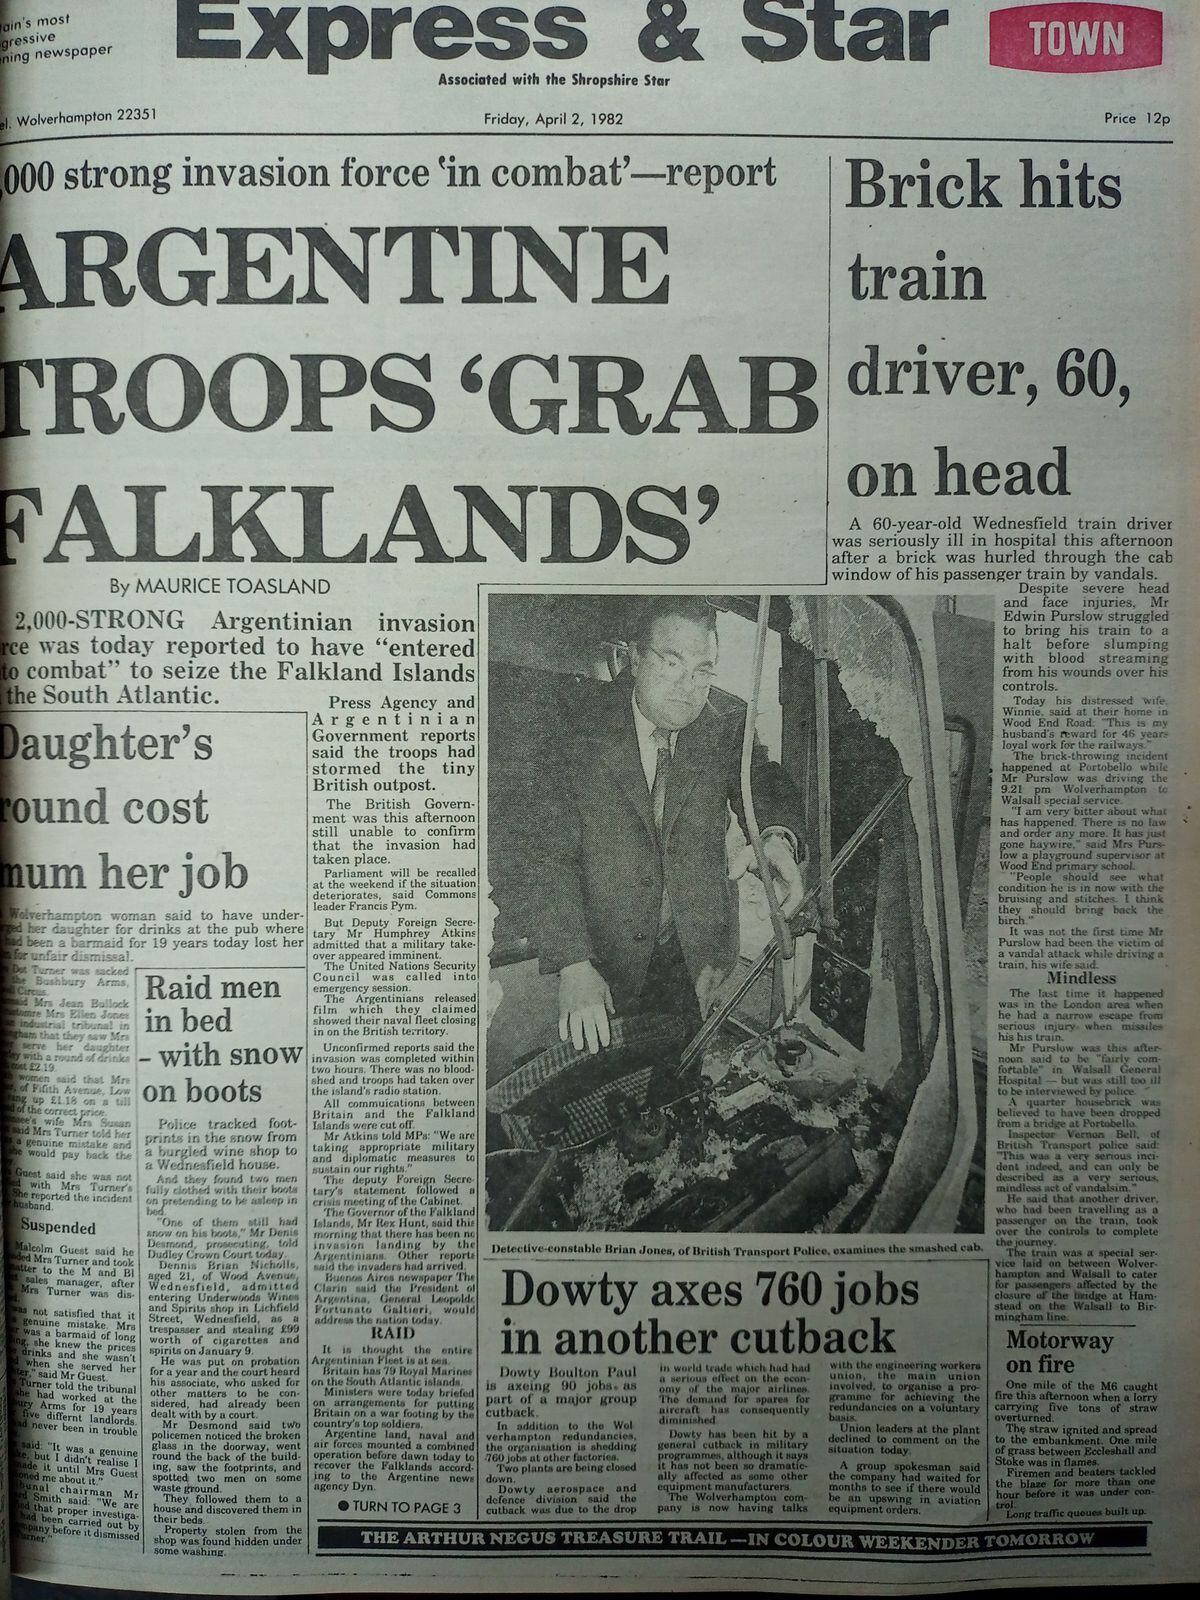 How the Express & Star reported on the invasion